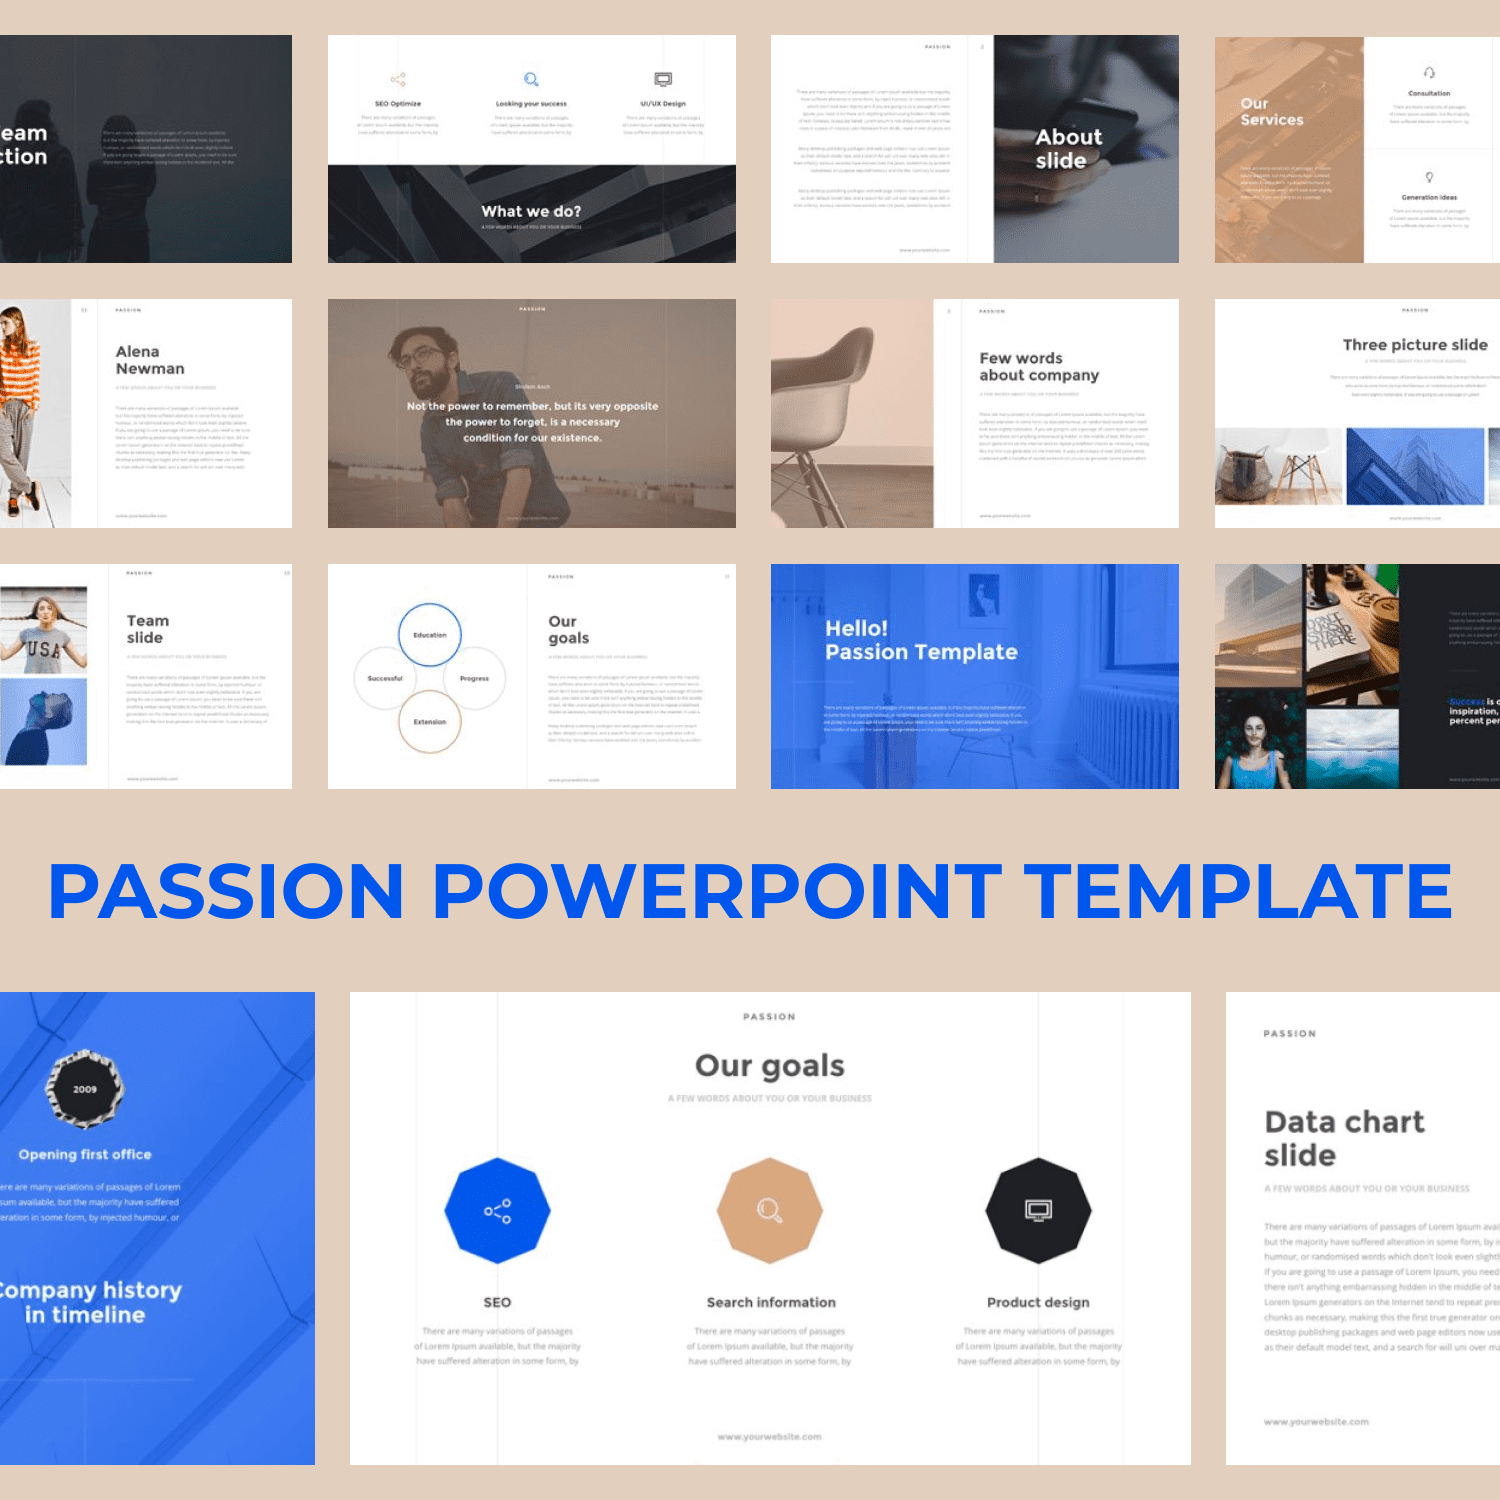 Passion PowerPoint Template main cover.